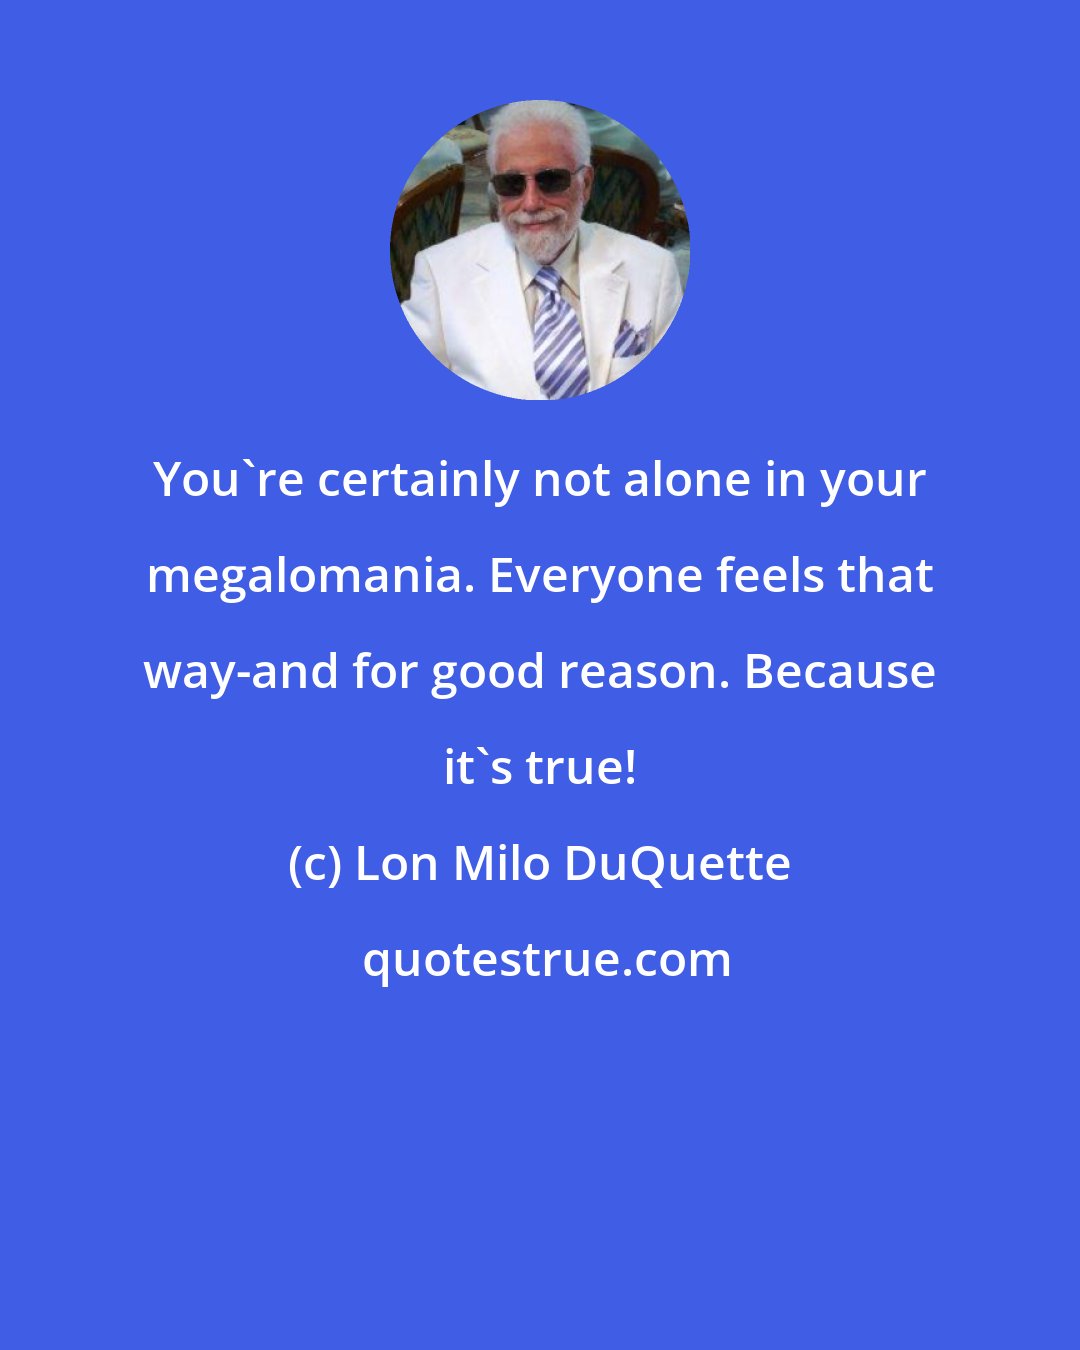 Lon Milo DuQuette: You're certainly not alone in your megalomania. Everyone feels that way-and for good reason. Because it's true!